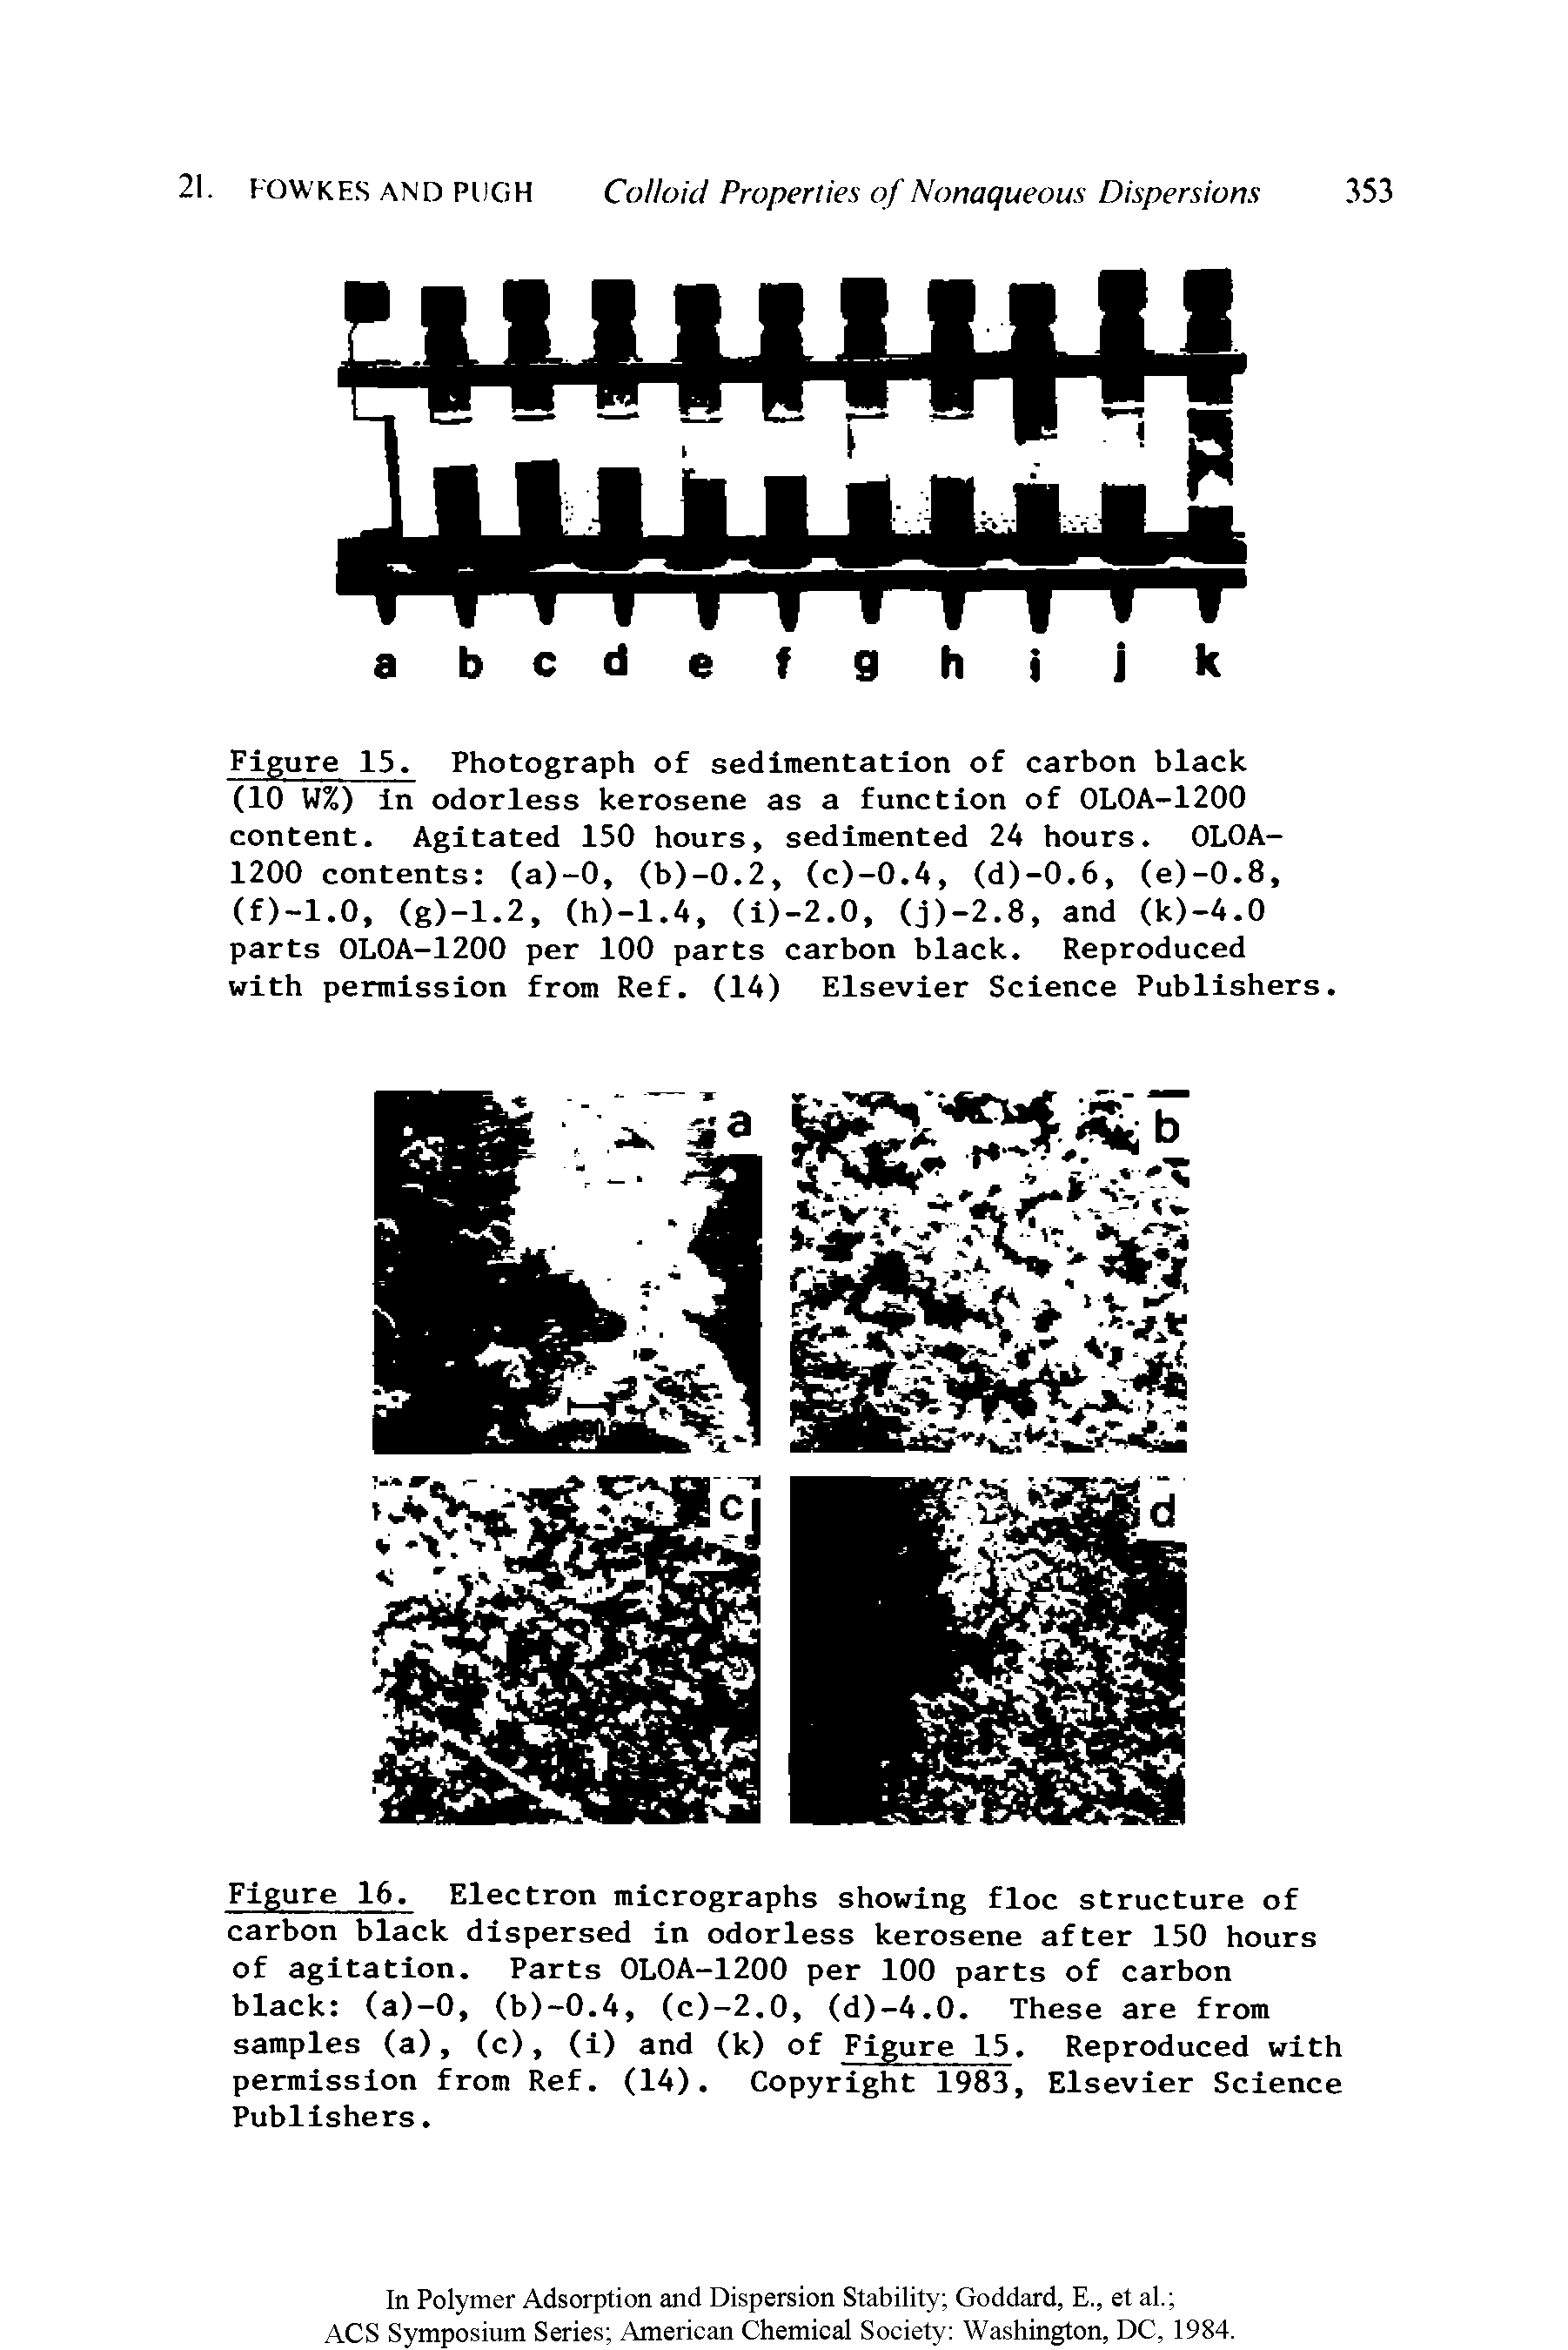 Figure 16. Electron micrographs showing floe structure of carbon black dispersed in odorless kerosene after 150 hours of agitation. Parts OLOA-1200 per 100 parts of carbon black (a)-0, (b)-0.A, (c)-2.0, (d)-A.O. These are from samples (a), (c), (i) and (k) of Figure 15. Reproduced with permission from Ref. (1A). Copyright 1983, Elsevier Science Publishers.